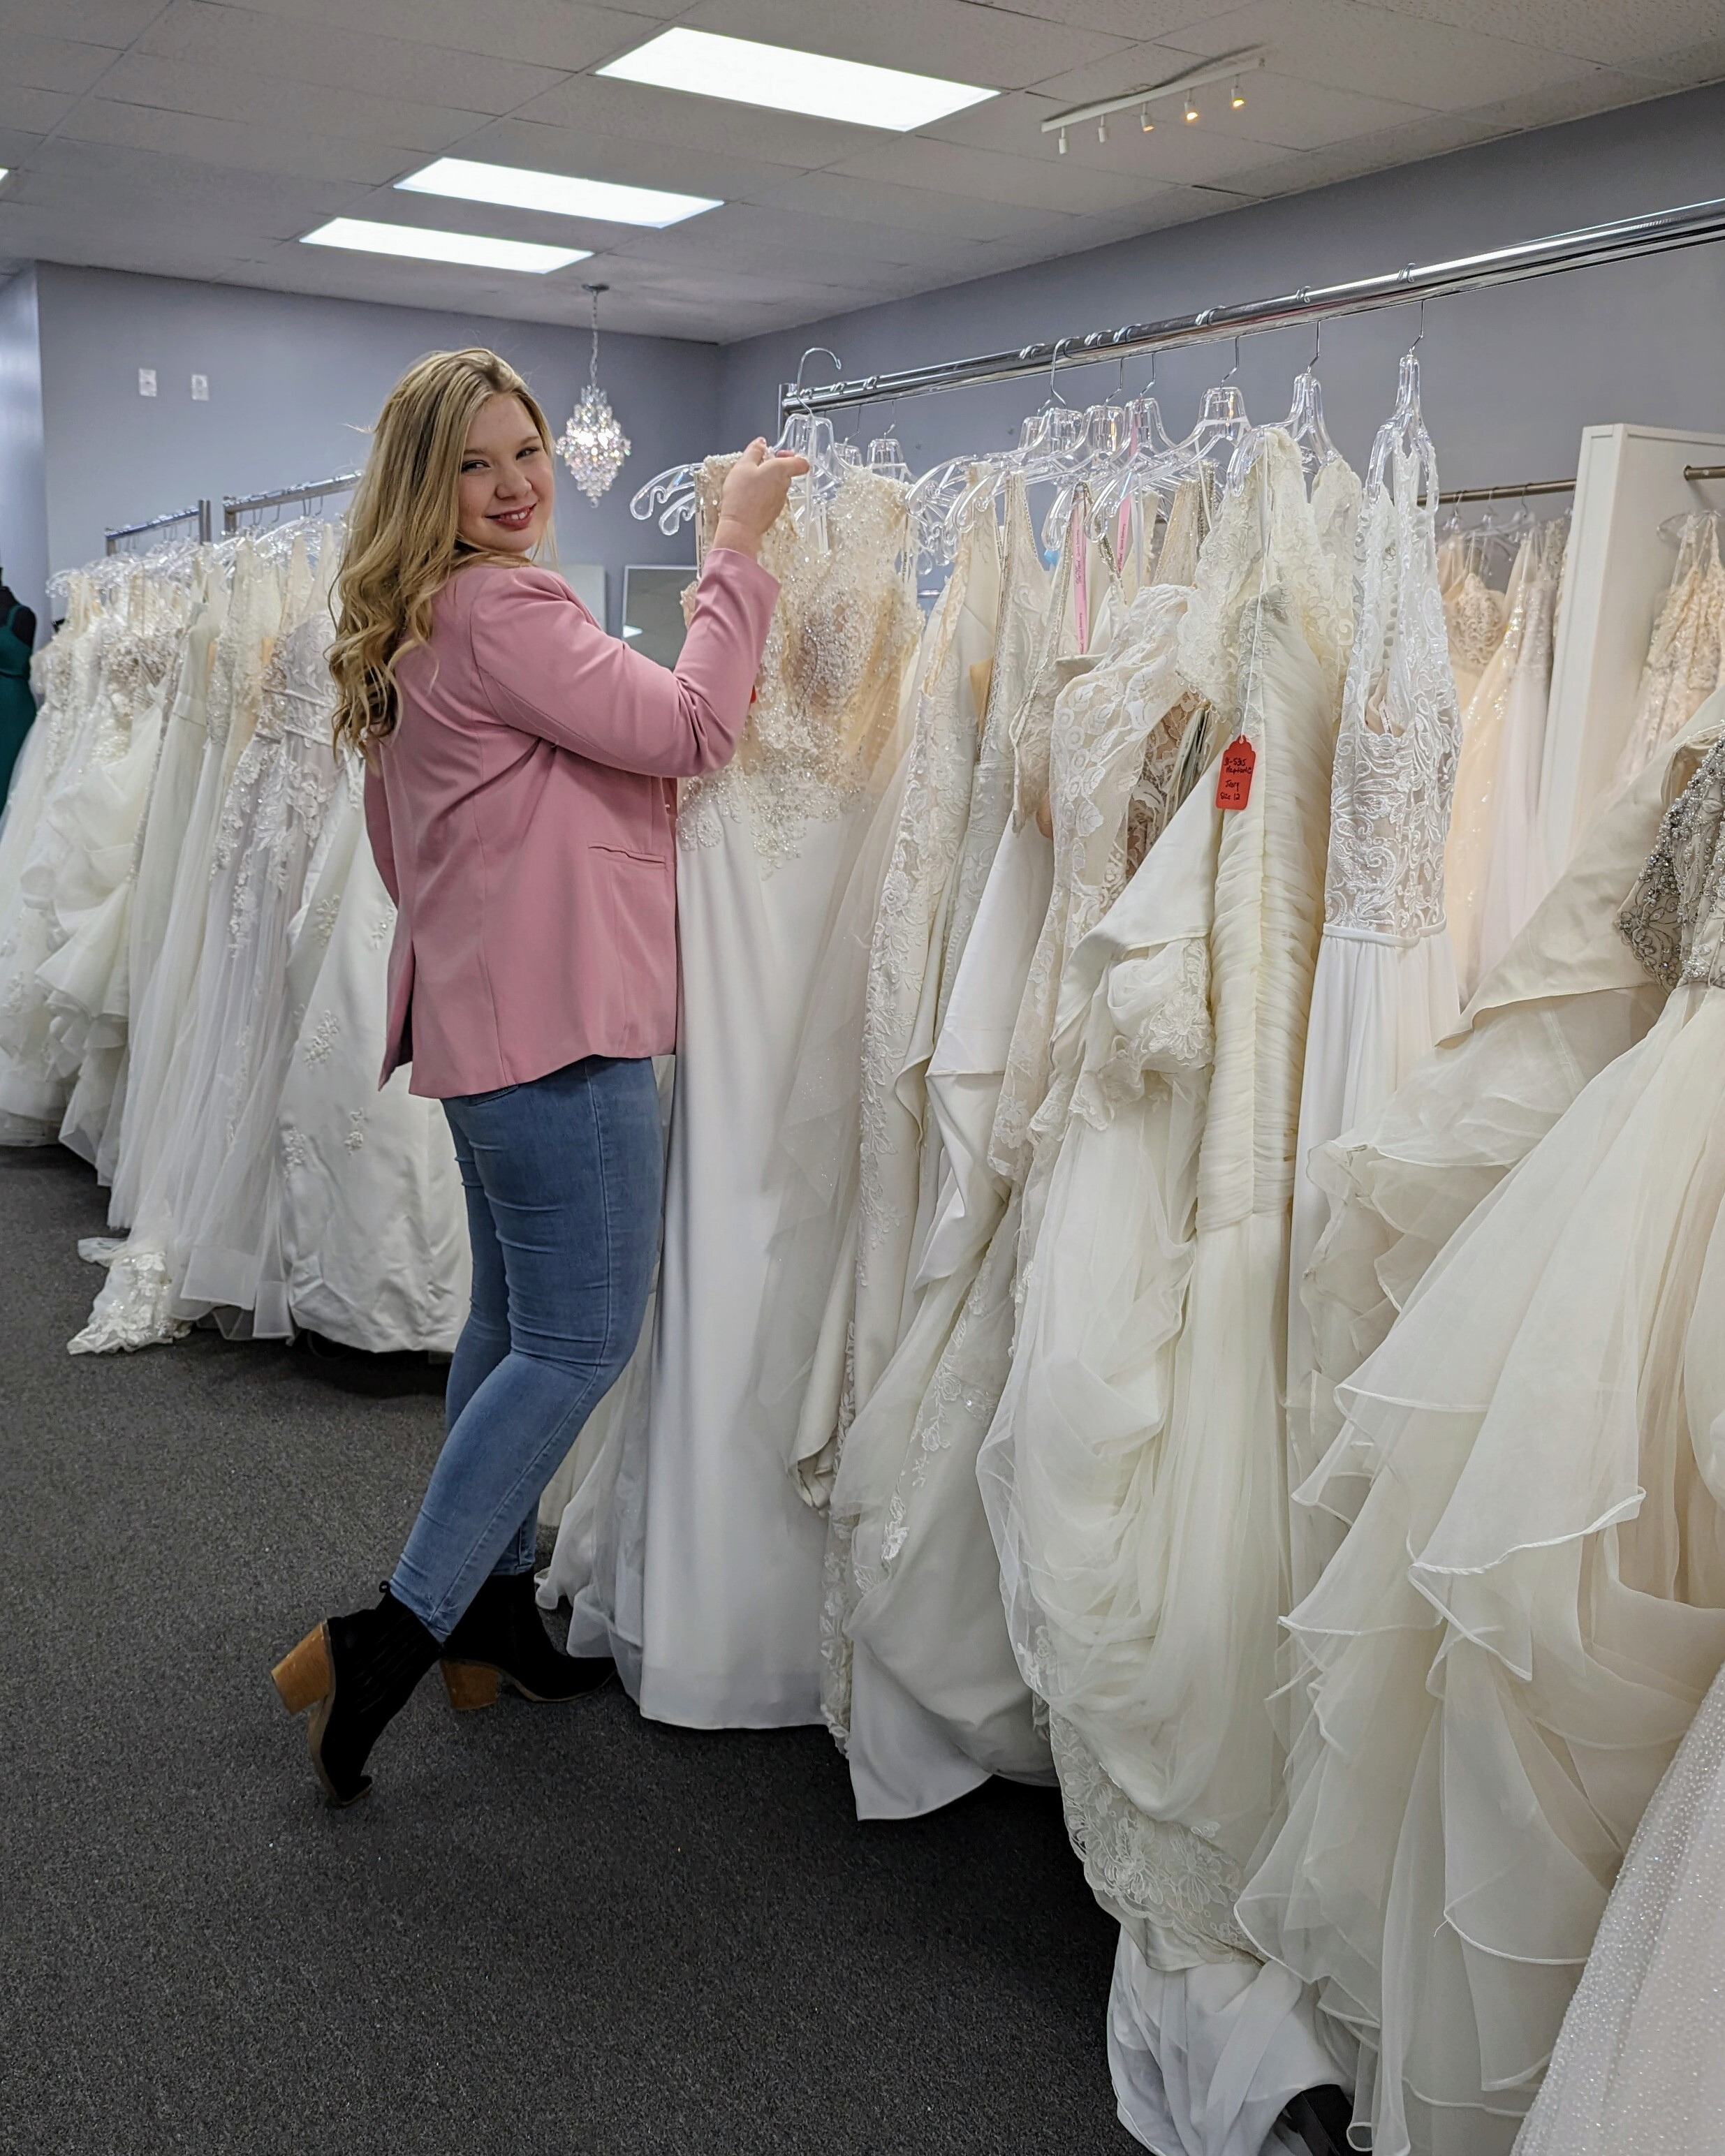 Make an appointment with one of our expert bridal consultants!